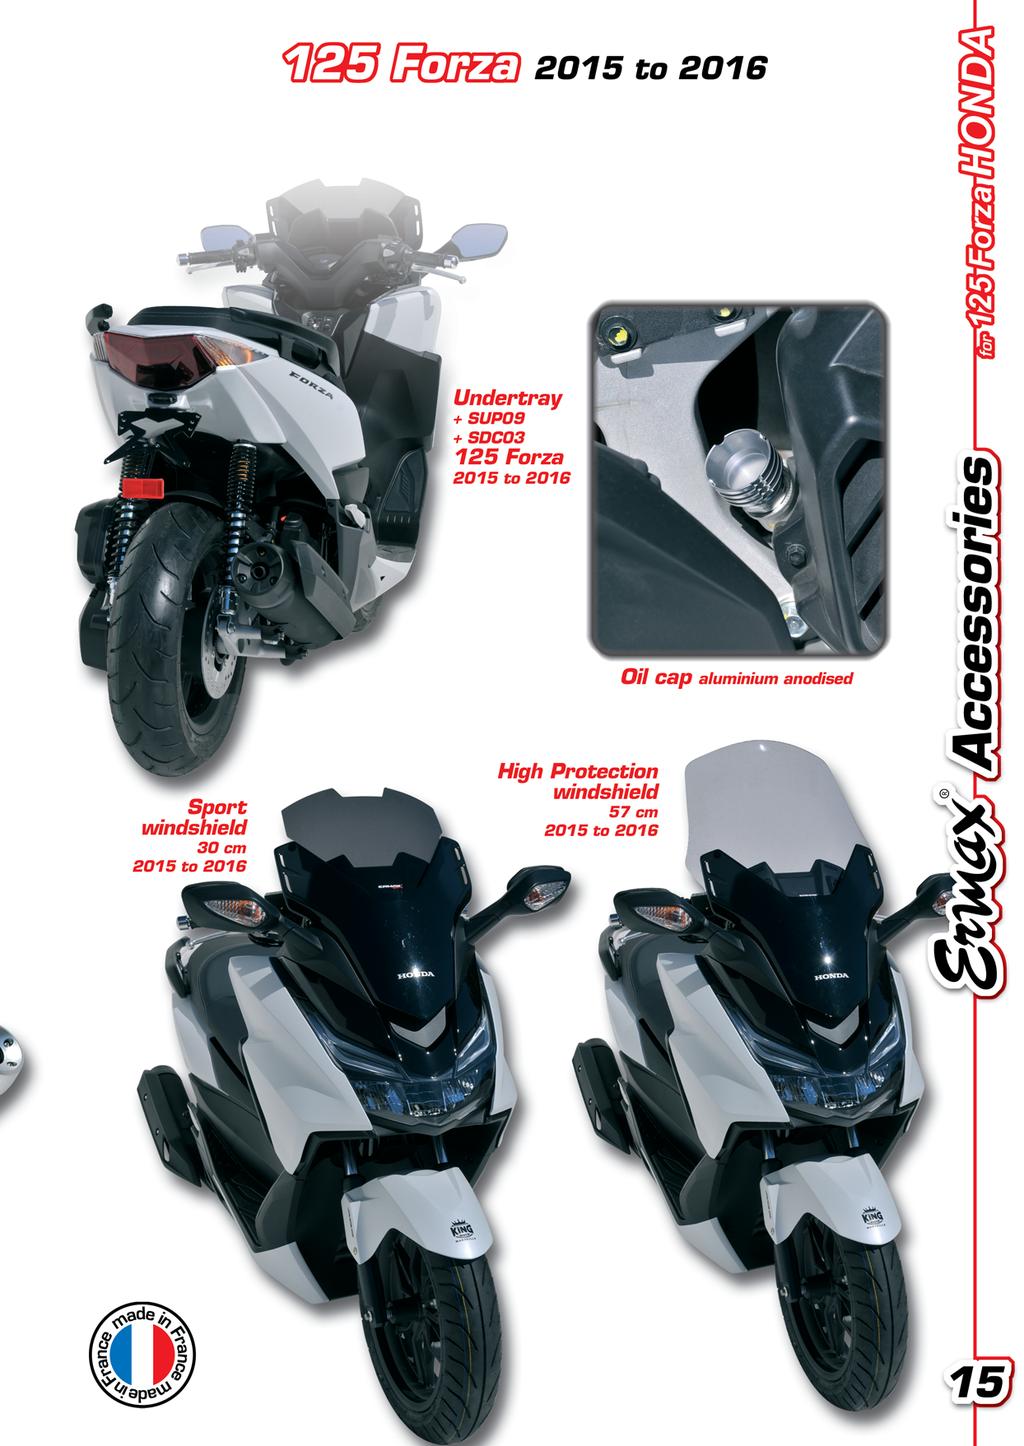 The use of the HONDA brand andor photos representing HONDA scooter models is made solely for customers information to indicate our products destination as accessories for these scooters.